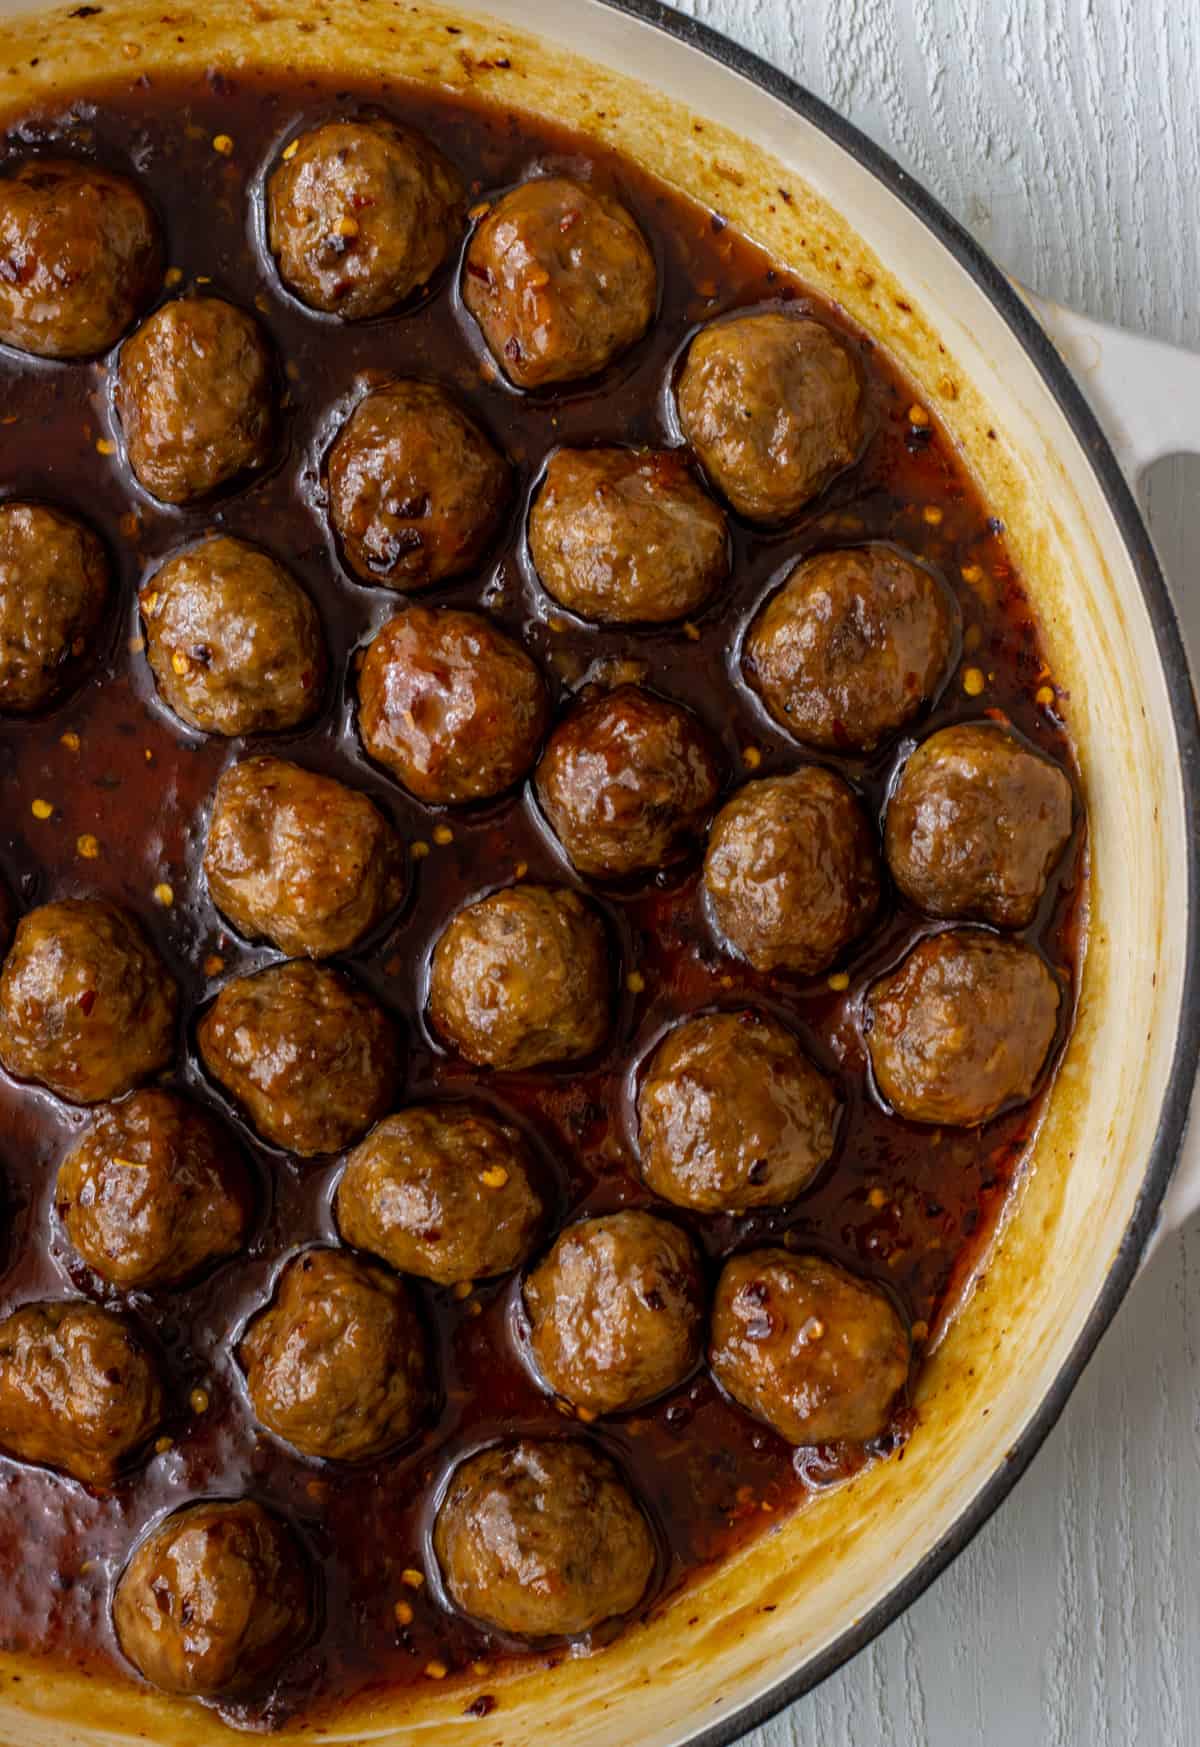 Meatballs coated in a sweet and spicy sauce in a skillet.